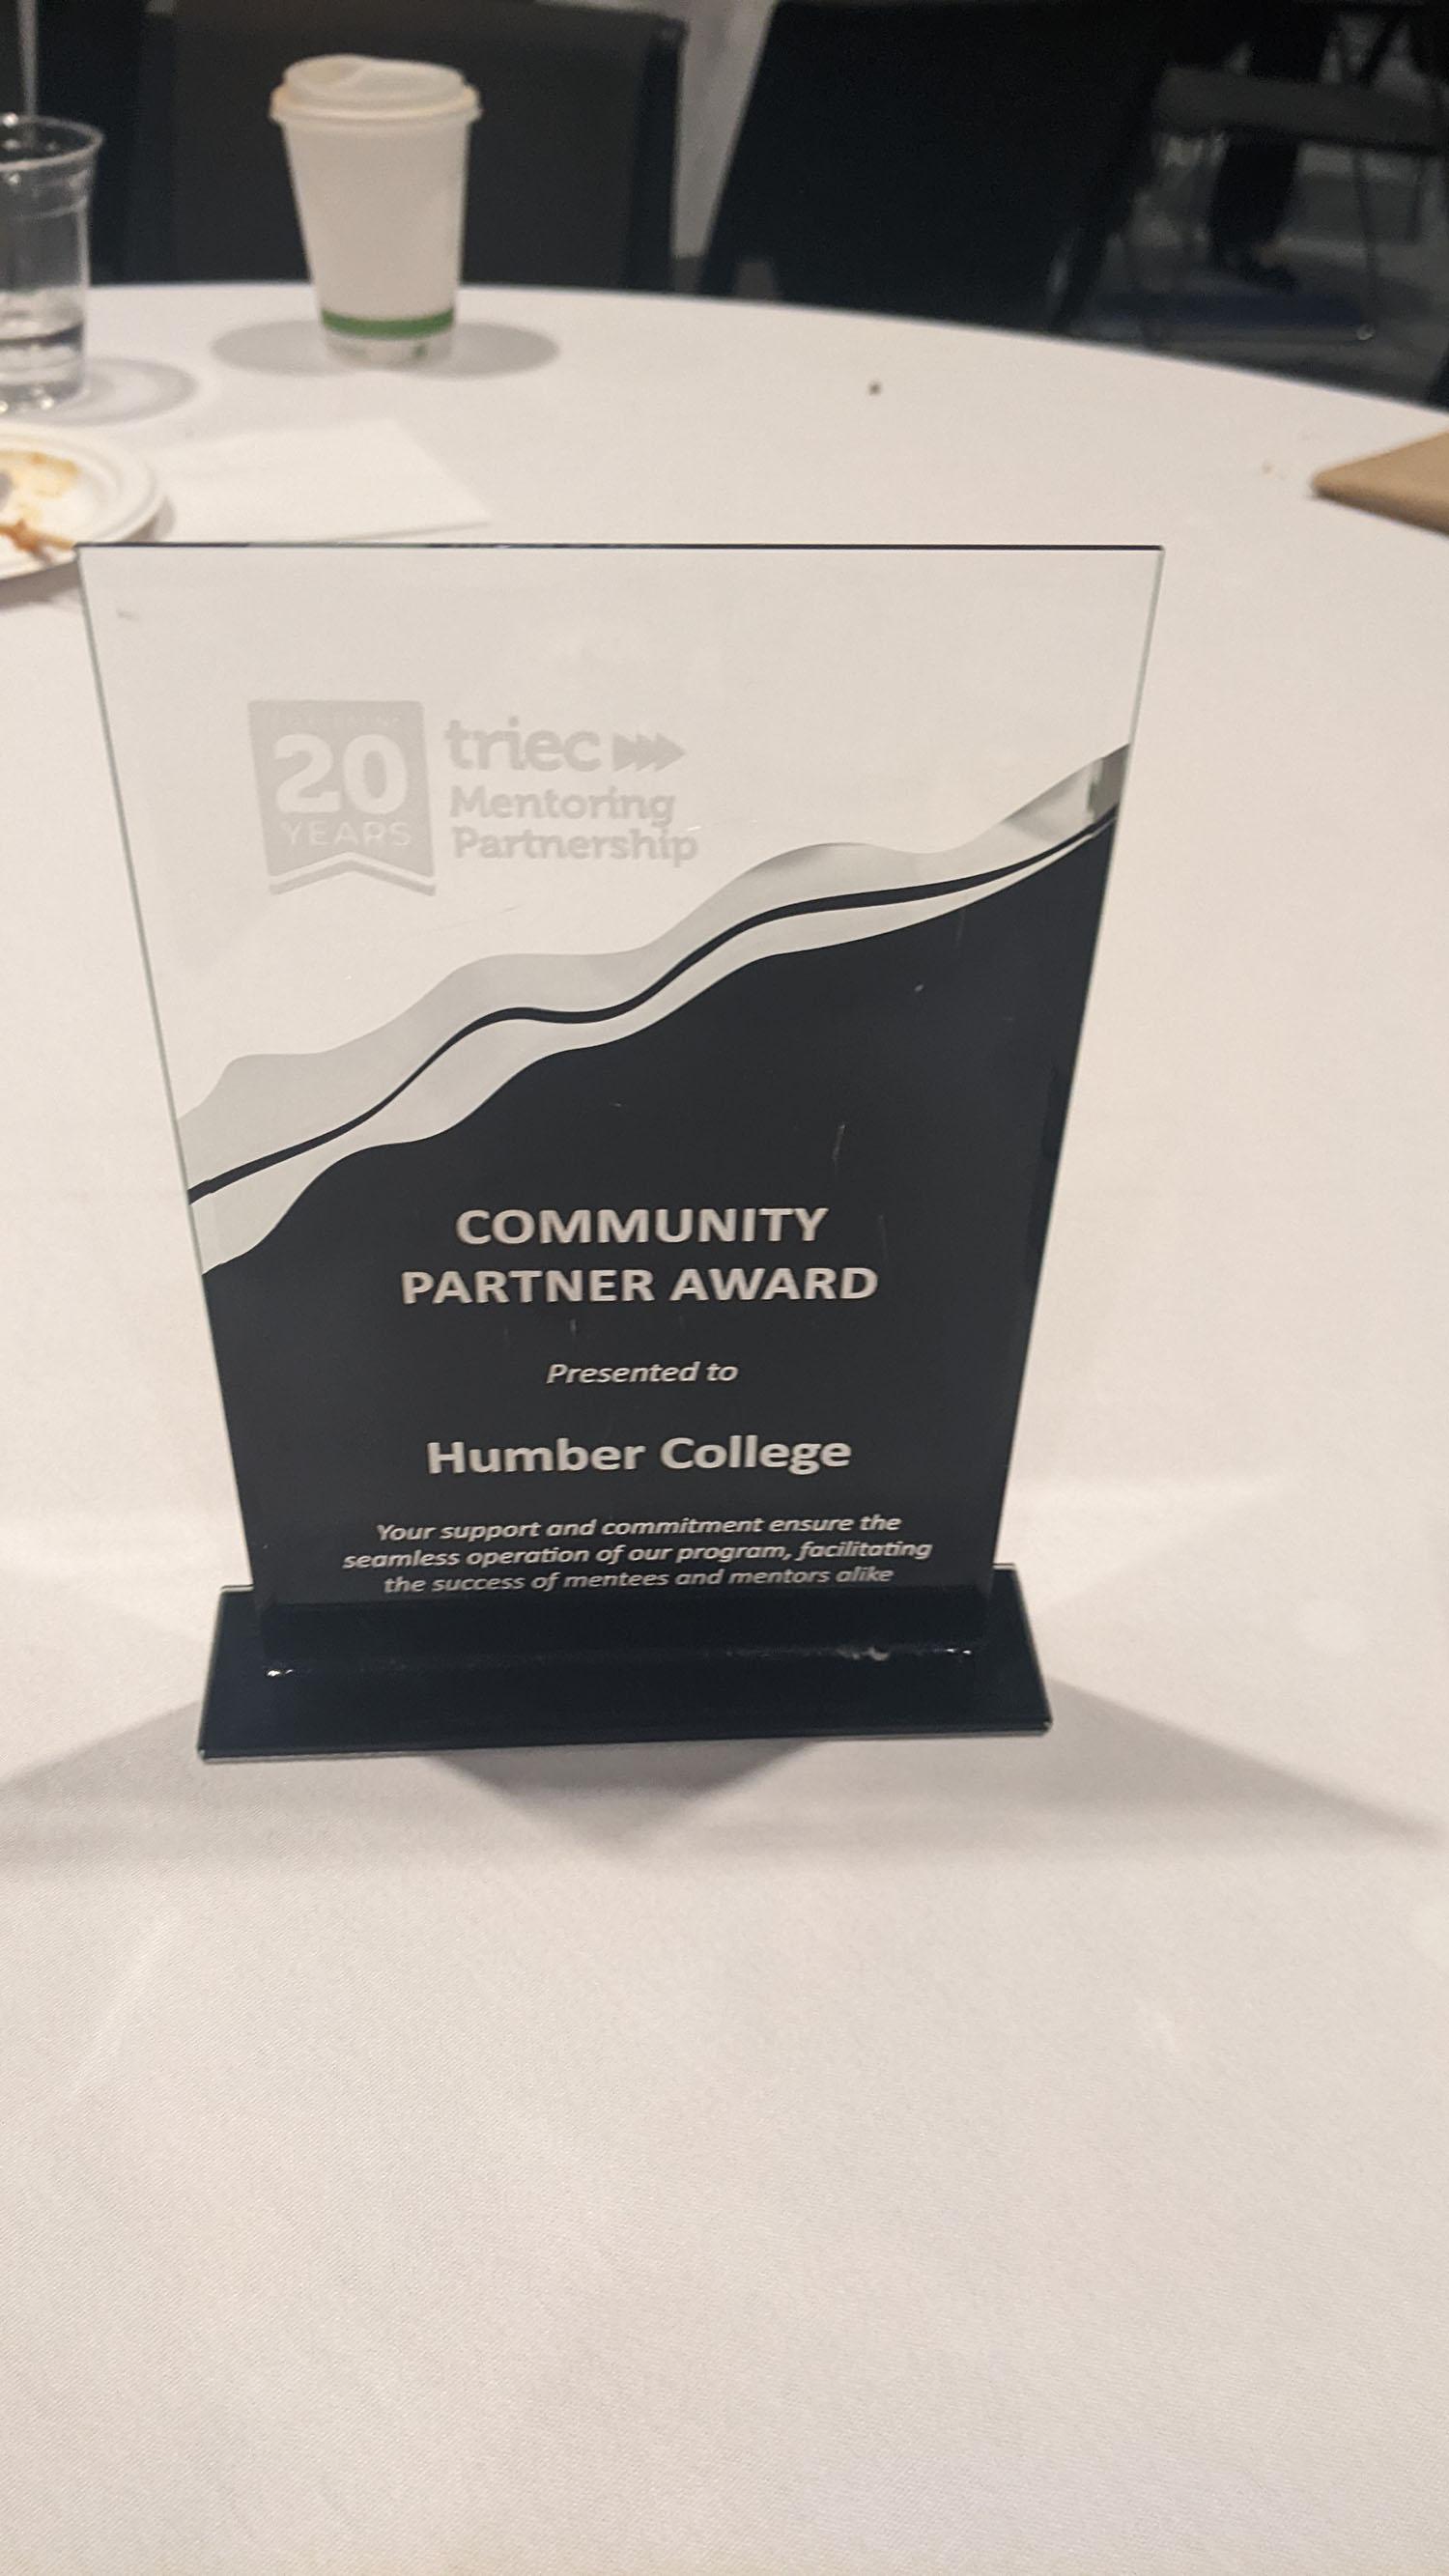 A trophy that reads Community Partner Award presented to Humber College.